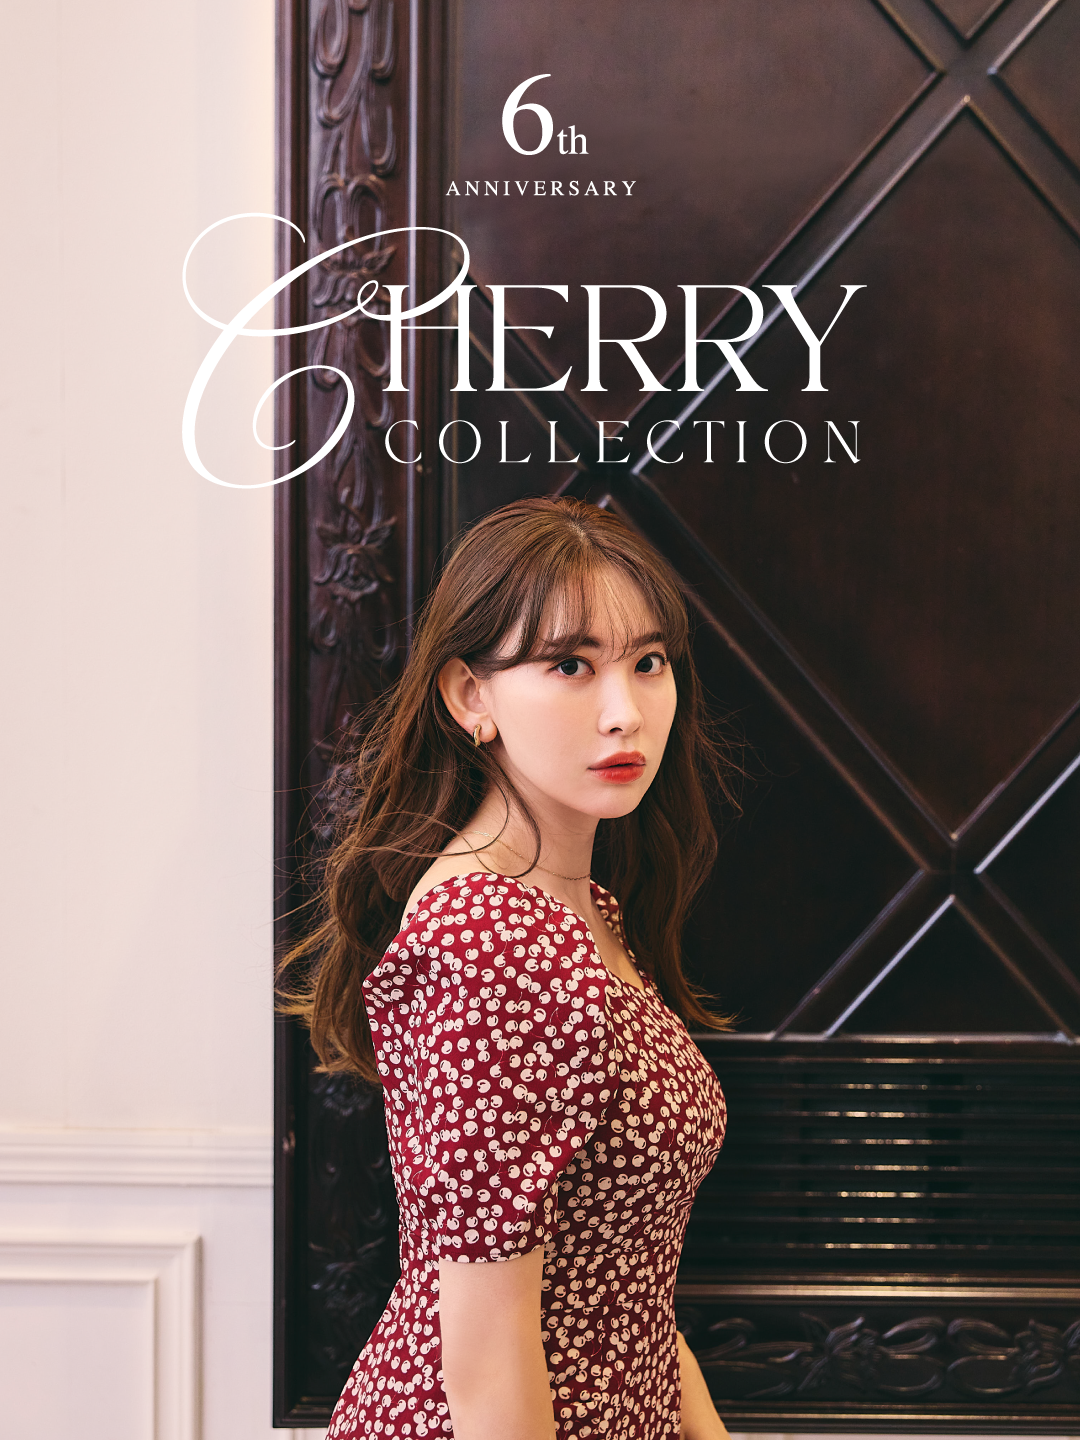 6th Anniversary Cherry Collection